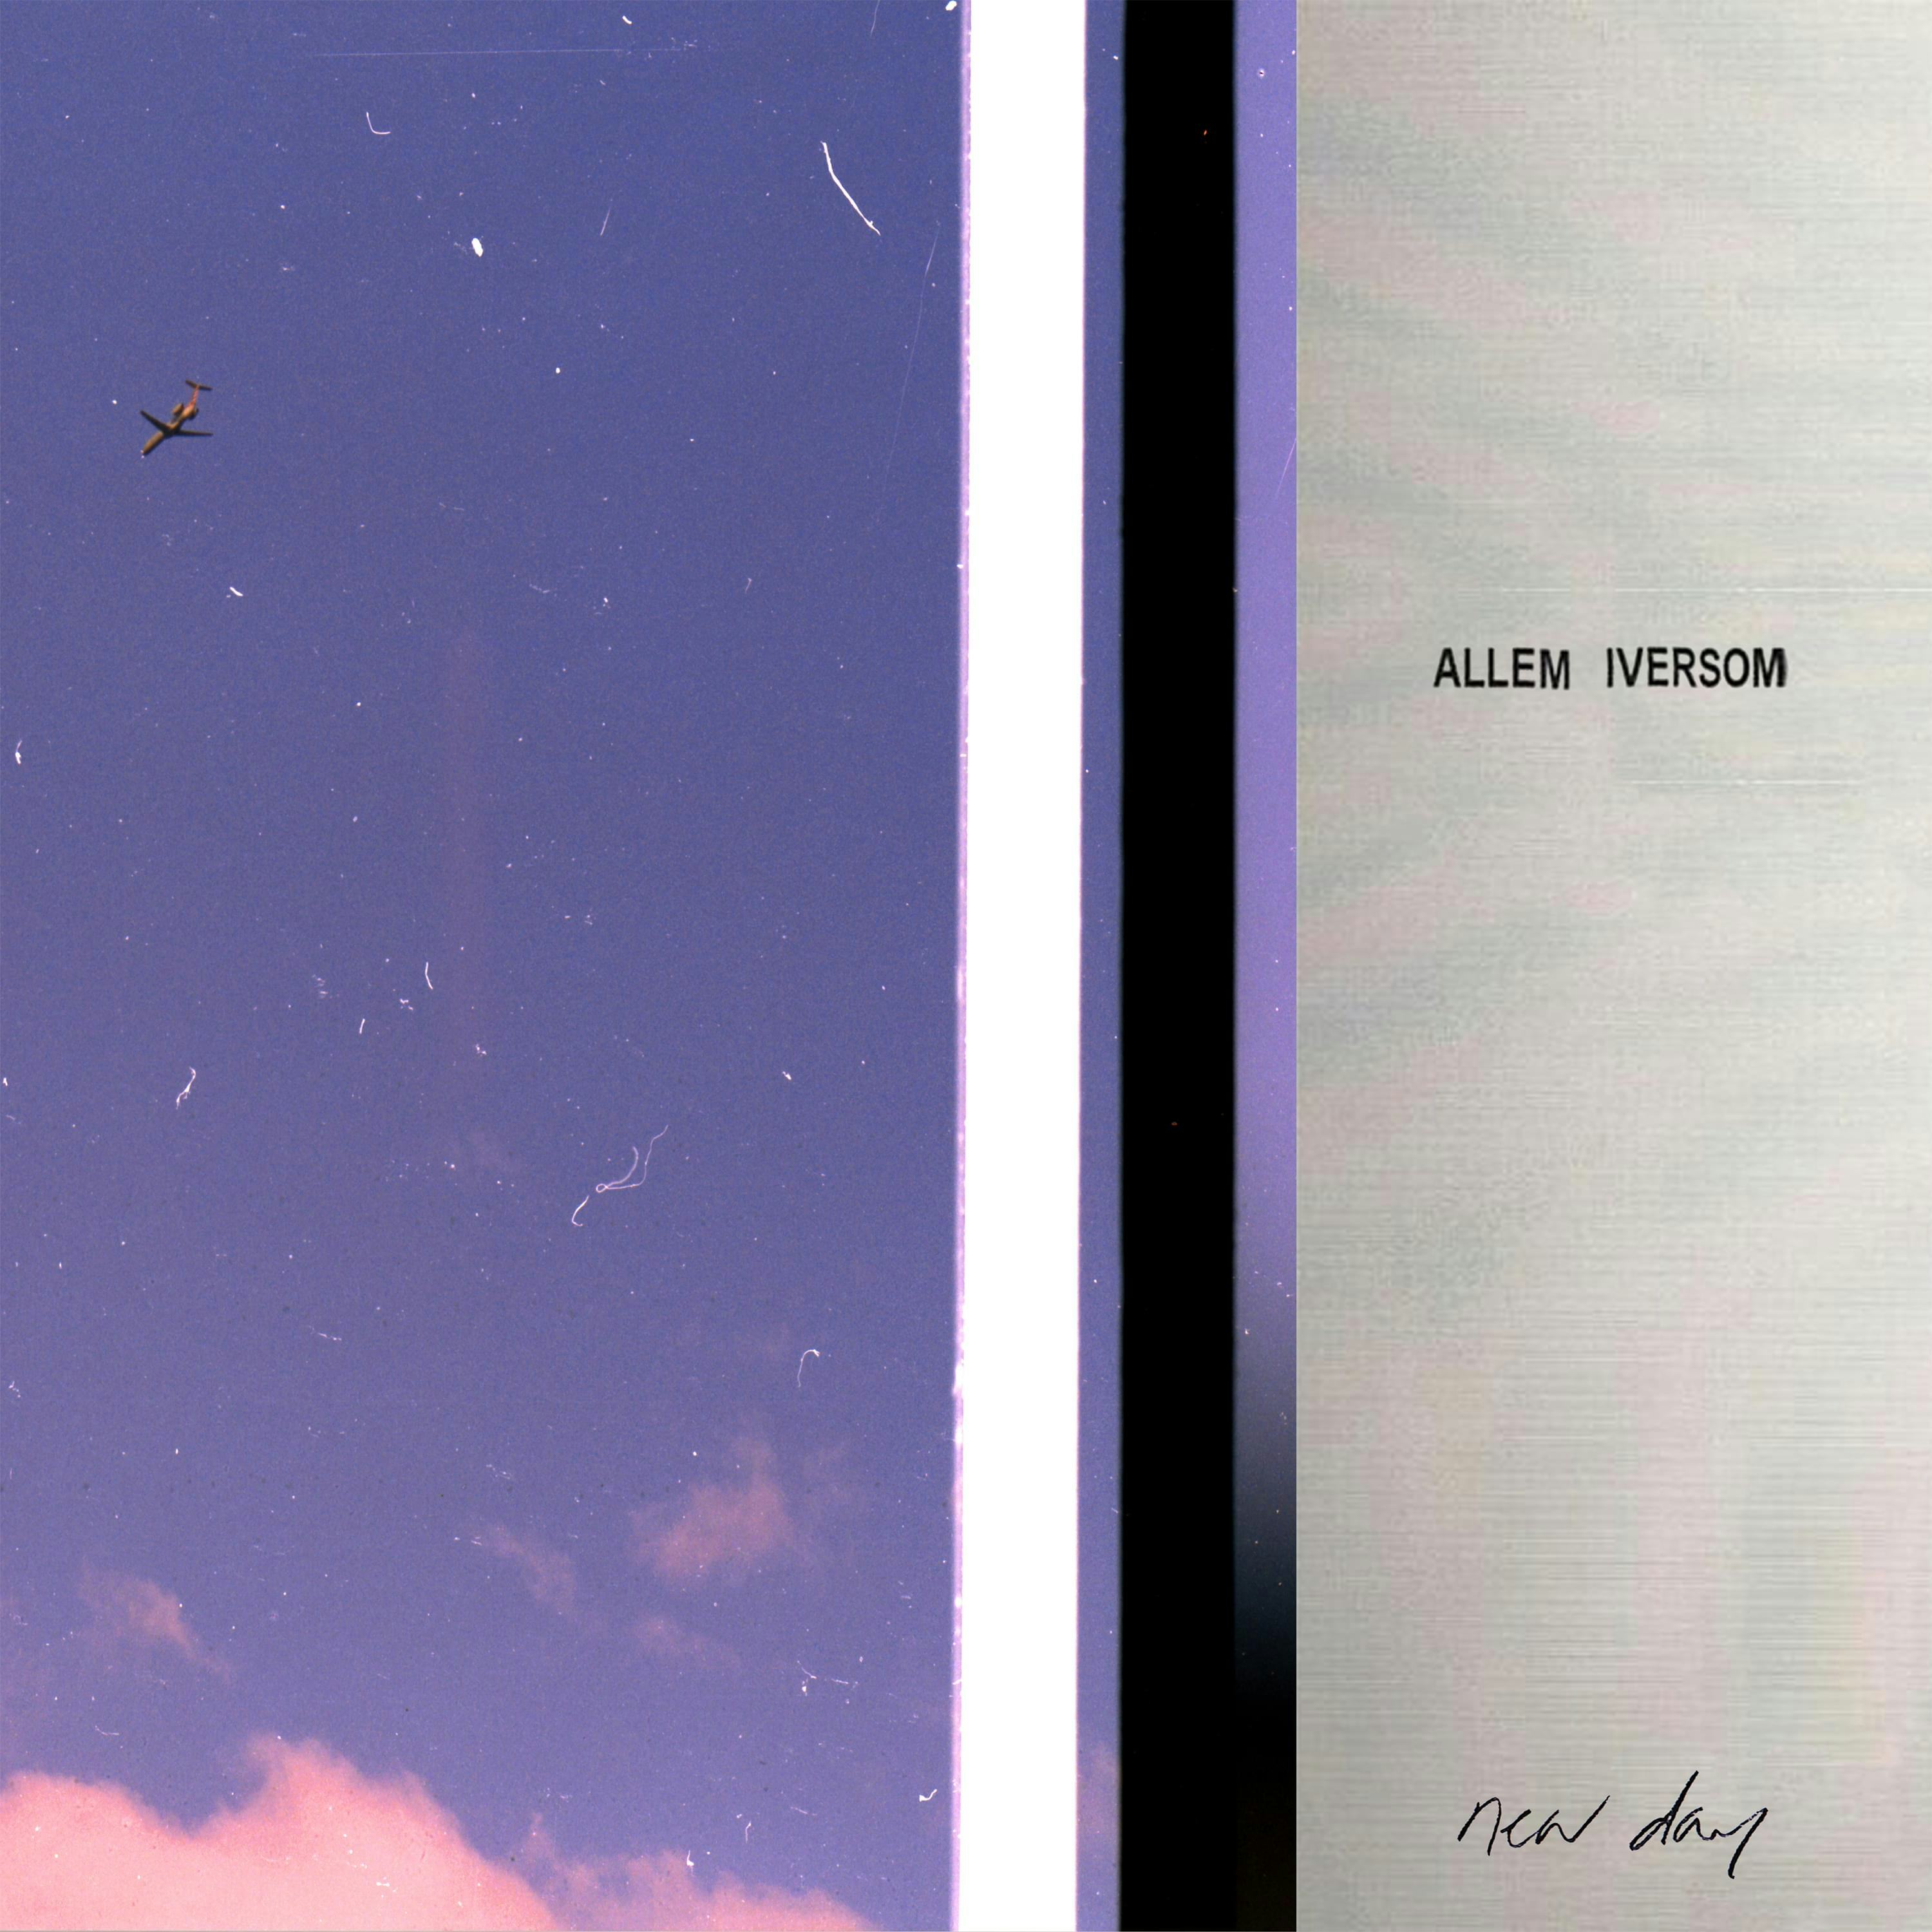 Cover art for its a new day by allem iversom